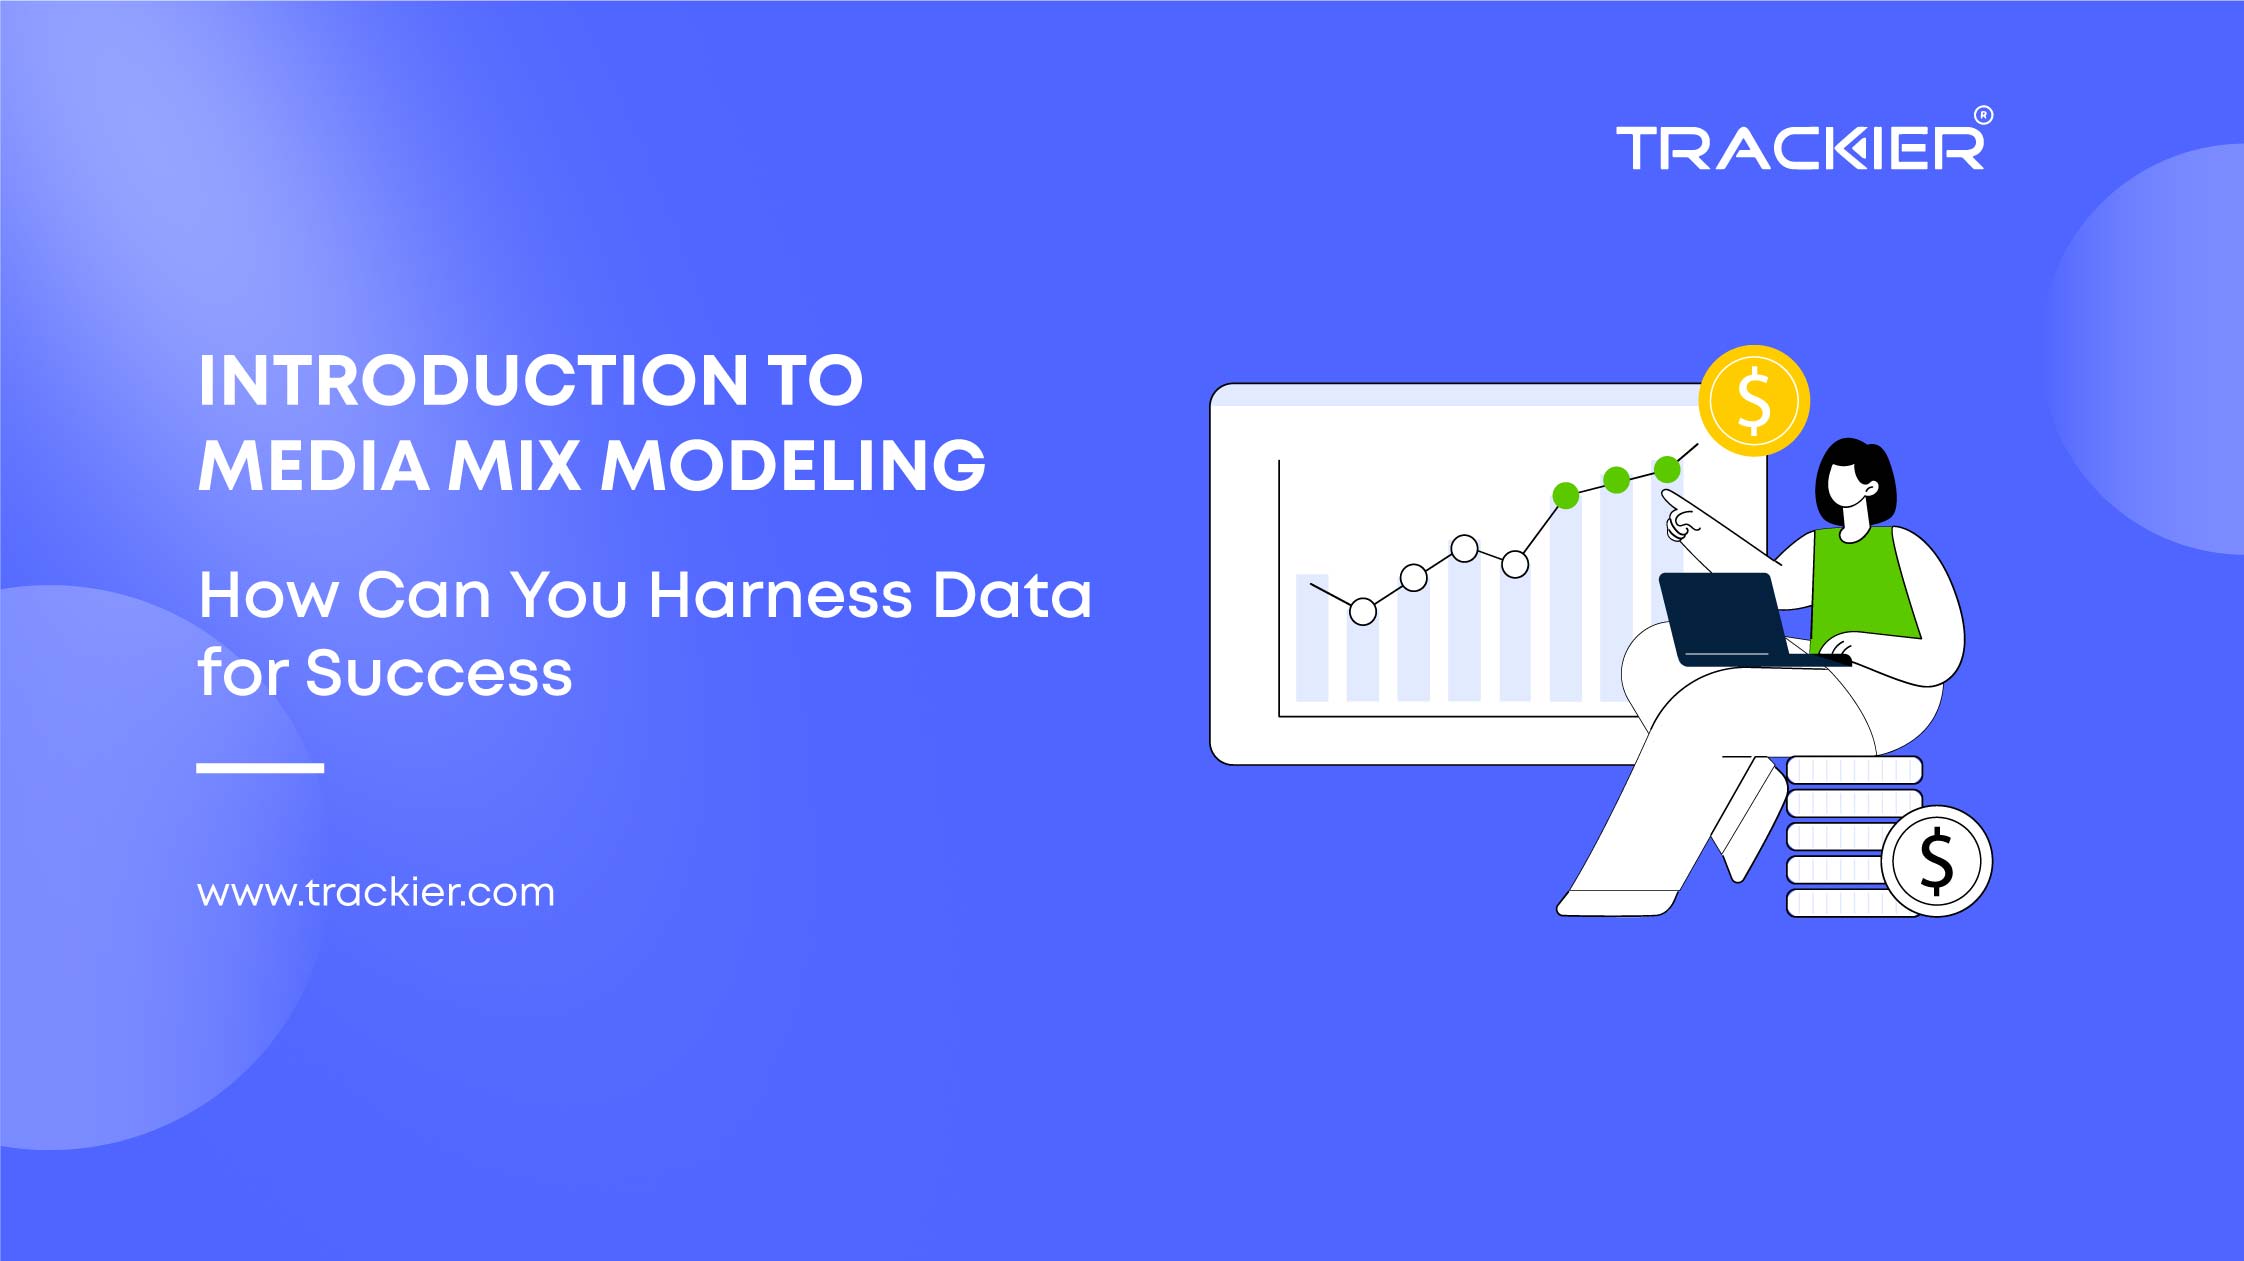 Learn To Harness Data Using Media Mix Modeling